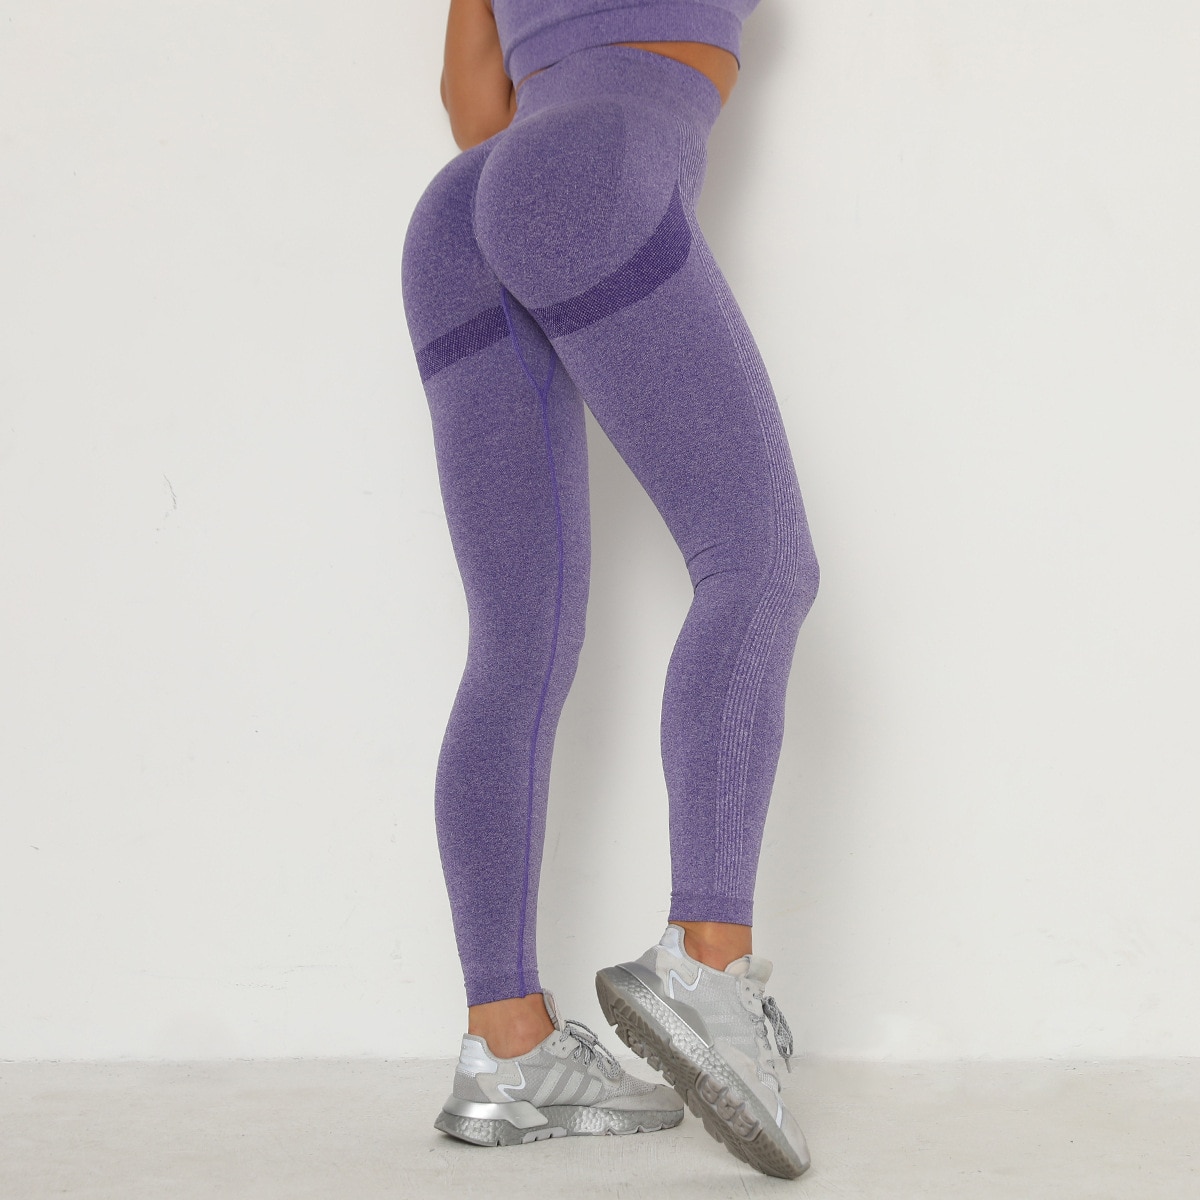 High Waist Seamless Leggings with Push Up Effect